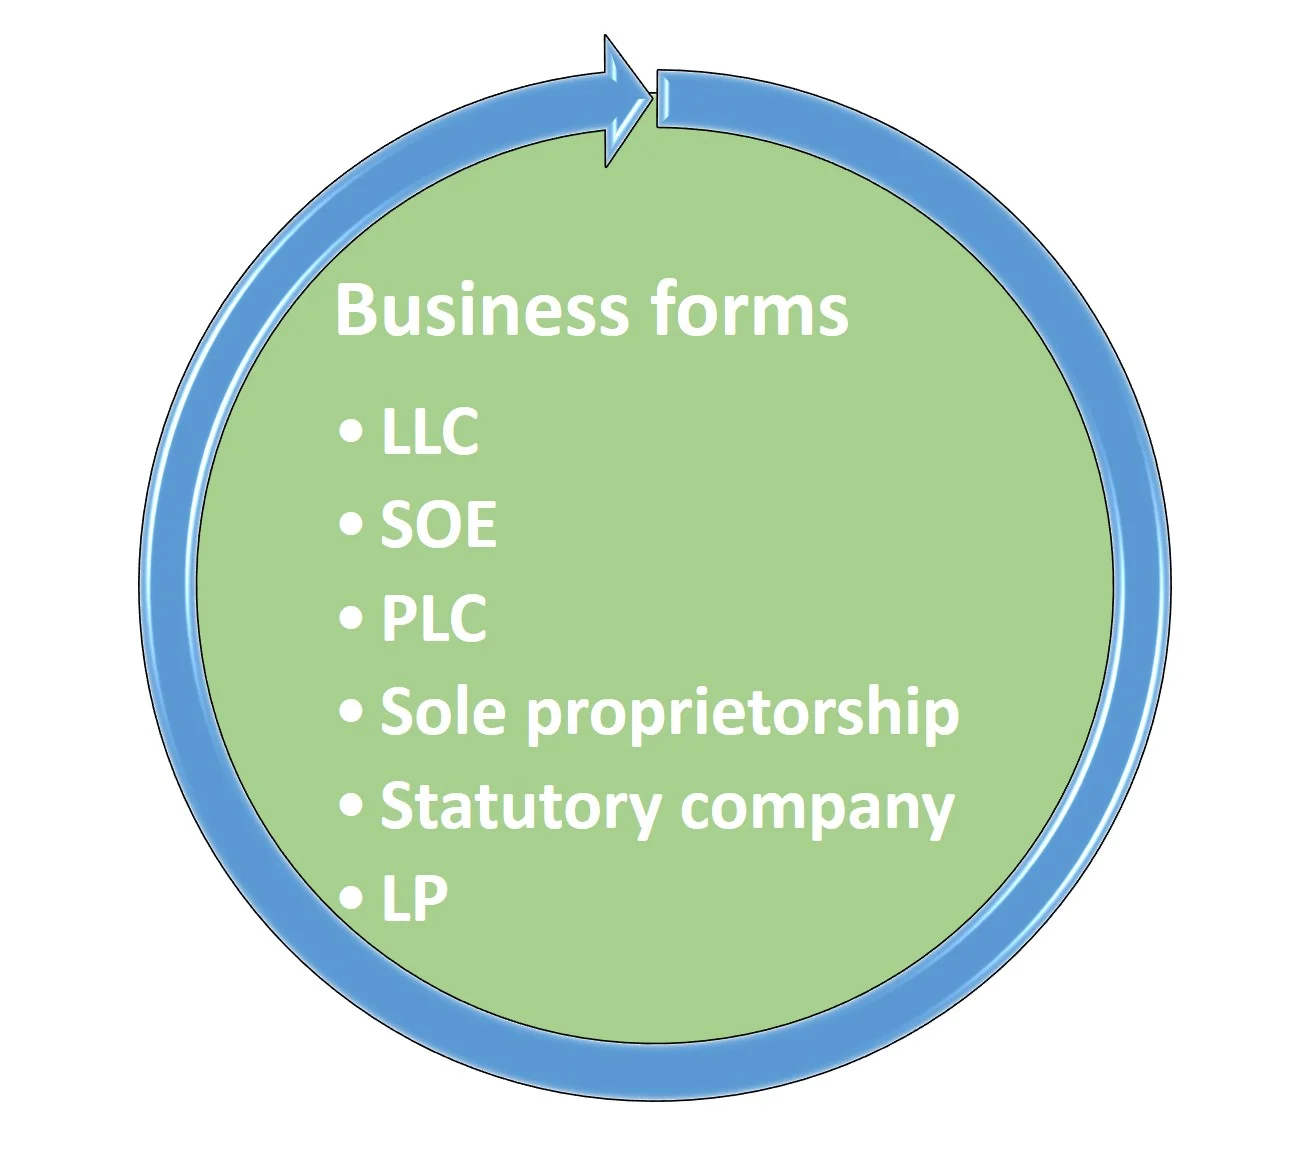 Business forms